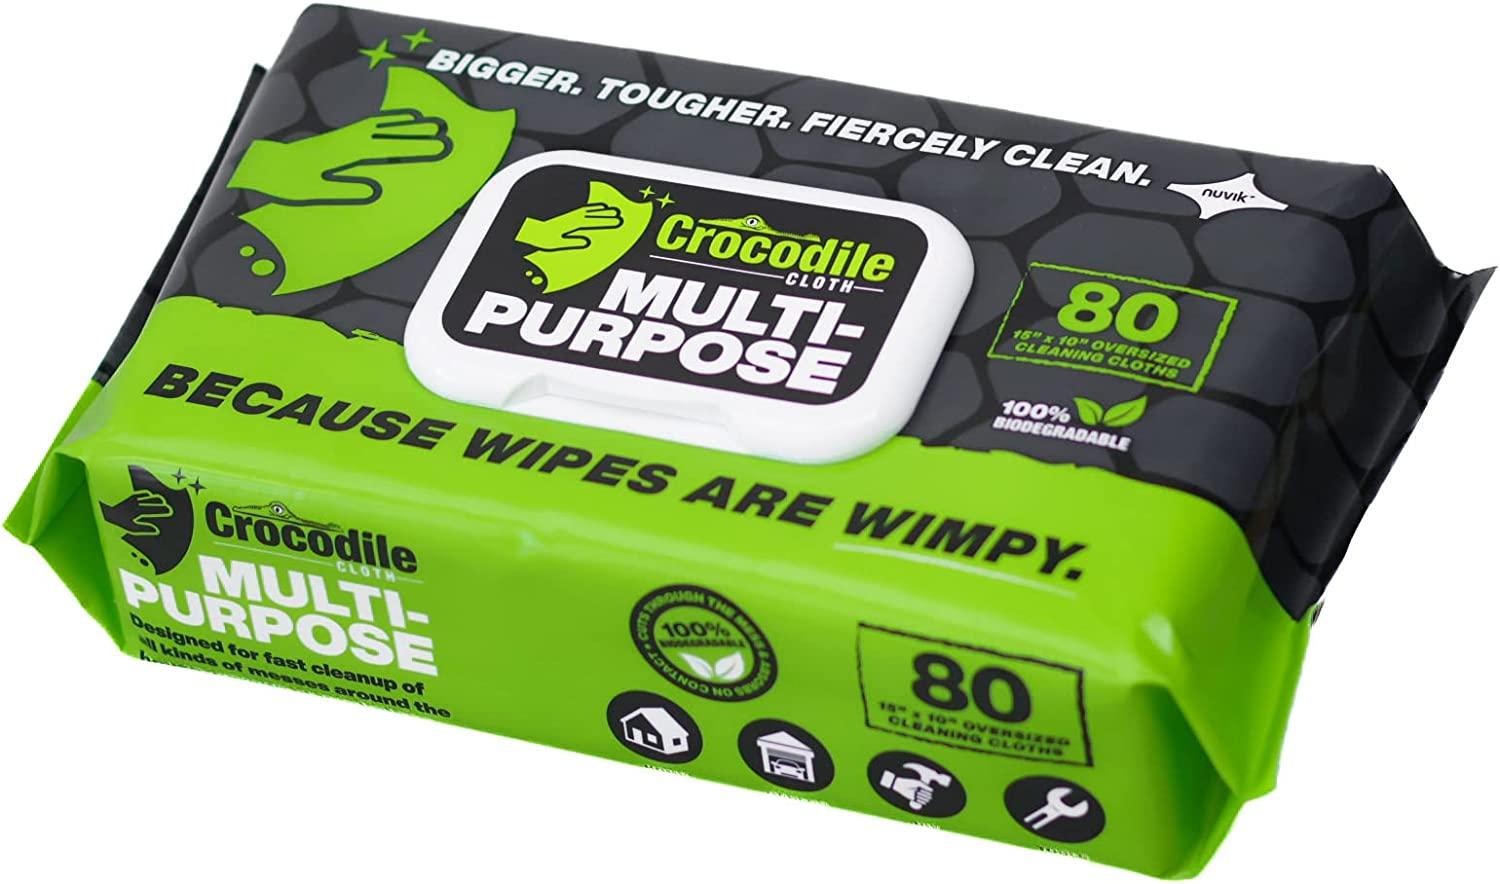 Crocodile Cloth Multi-Purpose Household Cleaning Wipes - The Stronger  Easier Way To Clean Grease, Dirt, Dust, Grime, & Glue From Hands, Tables,  and More - 80 Oversized, Heavy-Duty Biodegradable Wipes 80 Count (